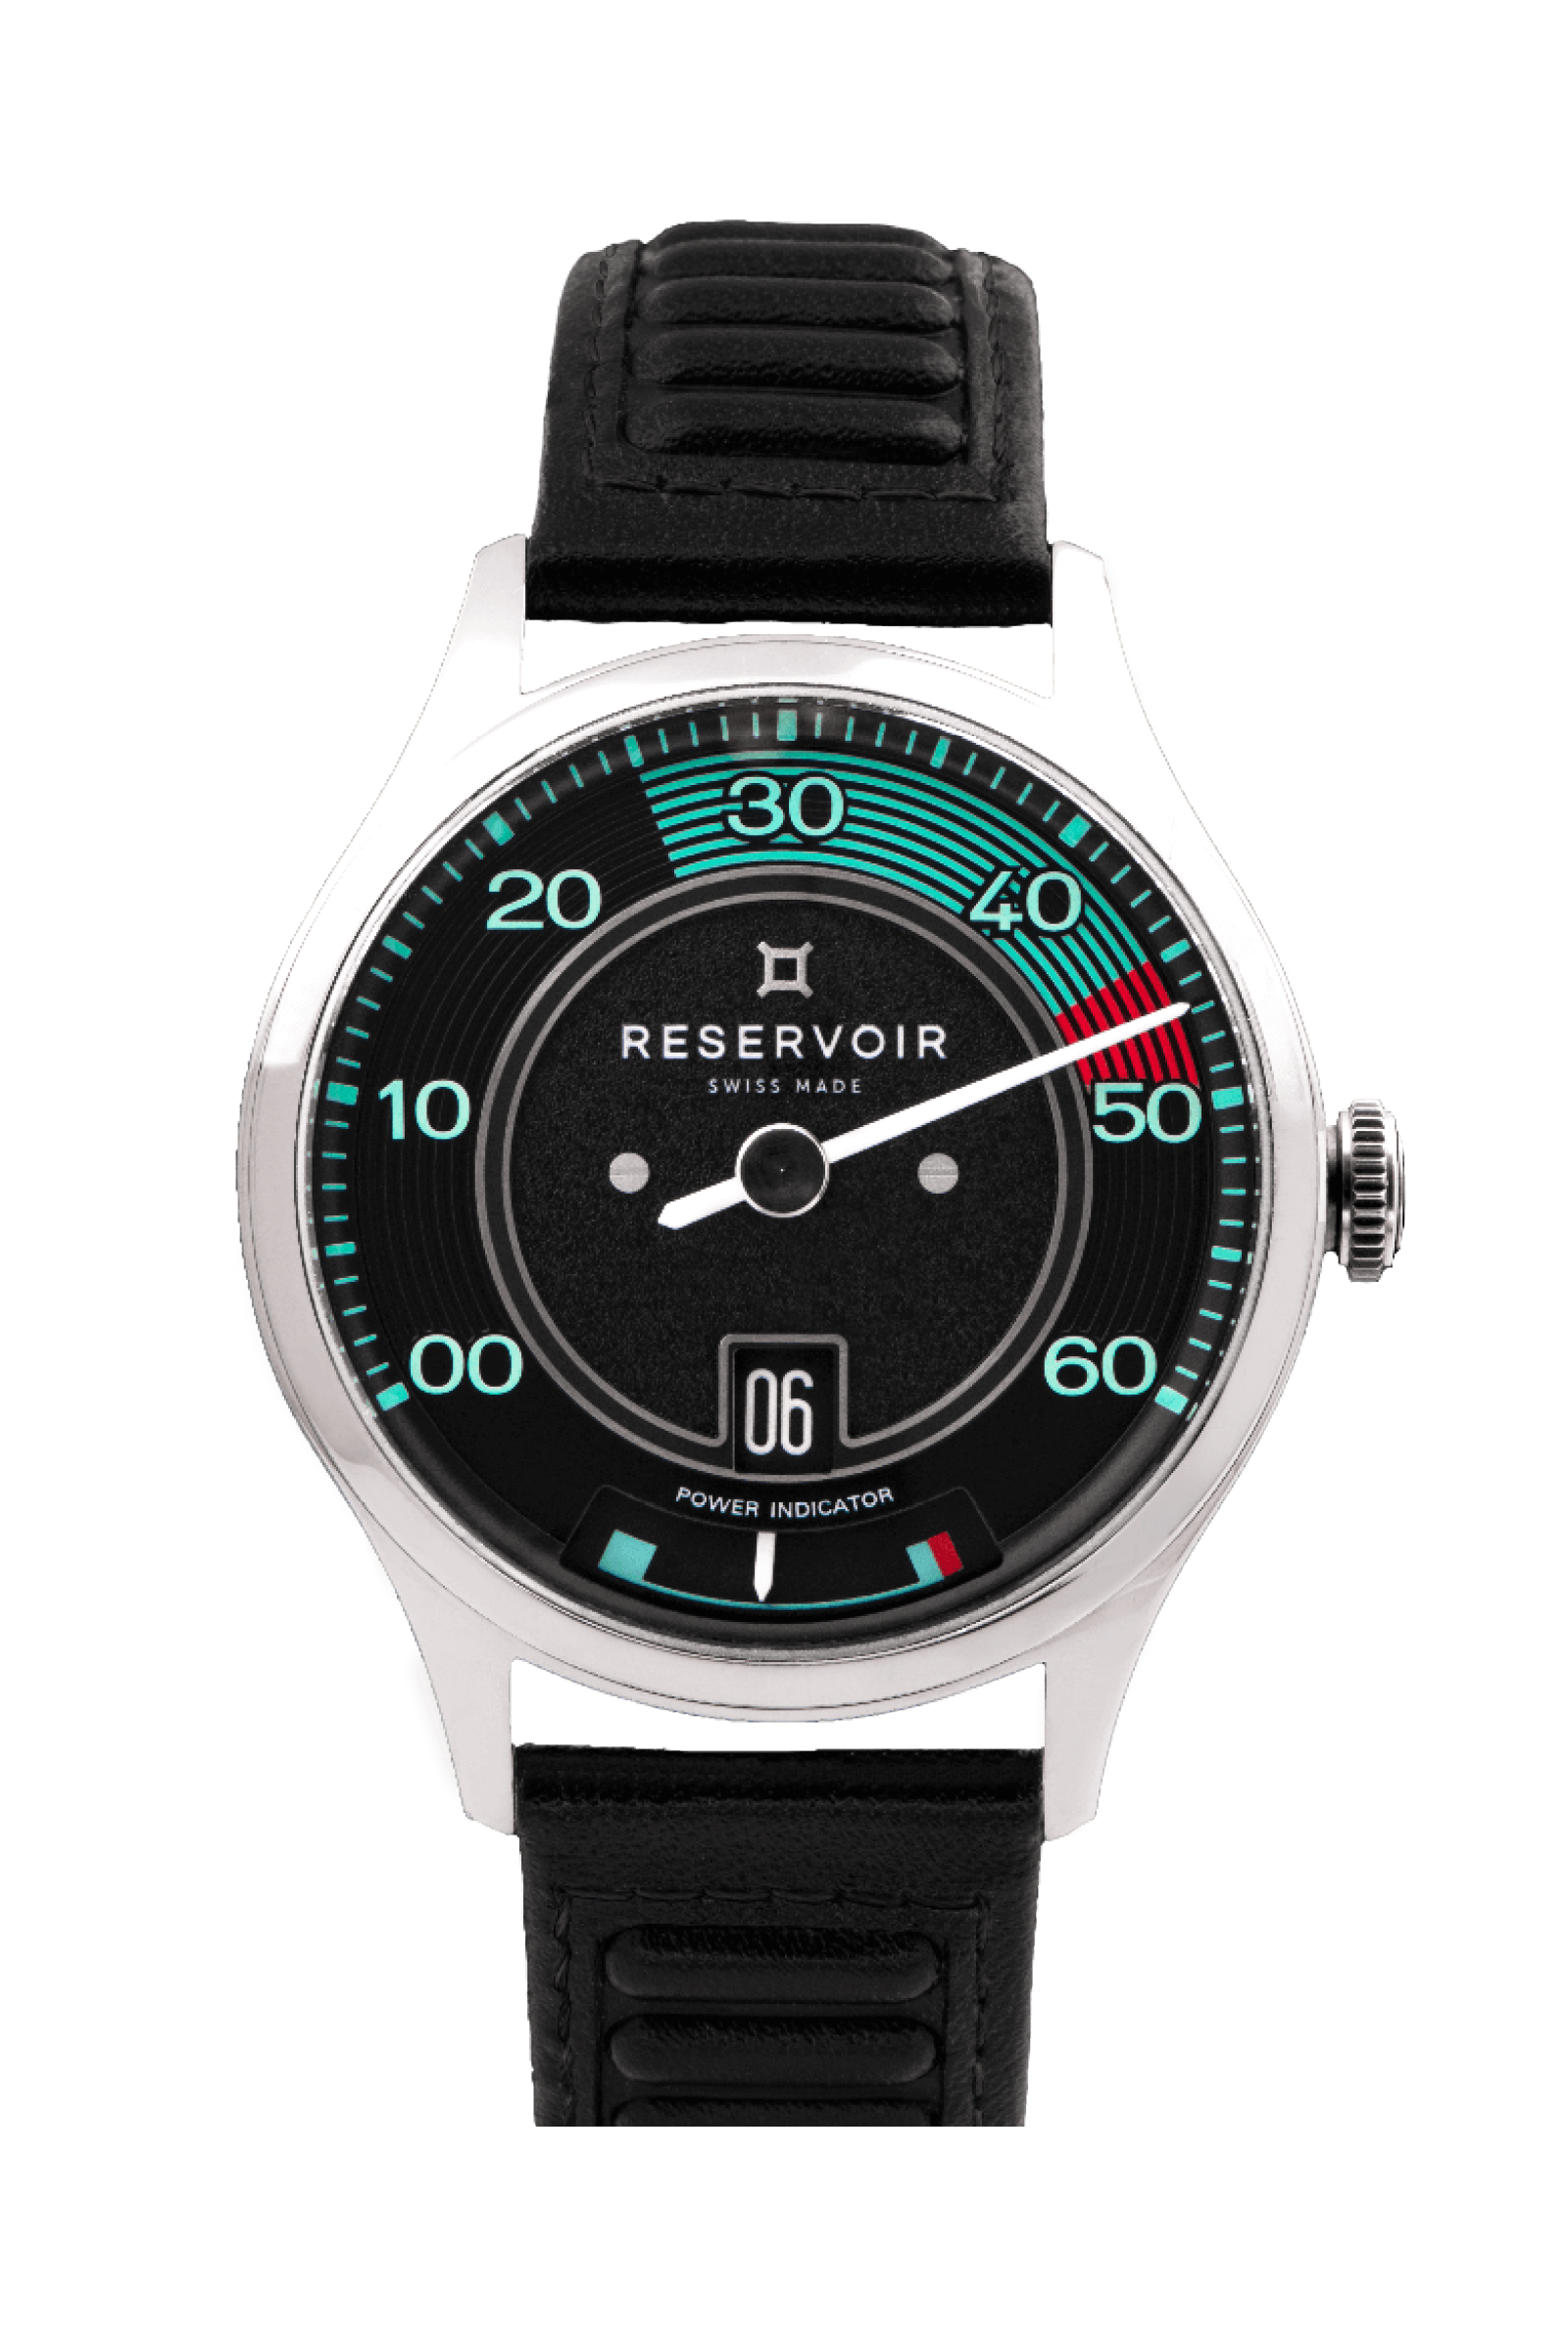 Black 356 Porsche Car Watch with Light Grey and Light Teal Accents.